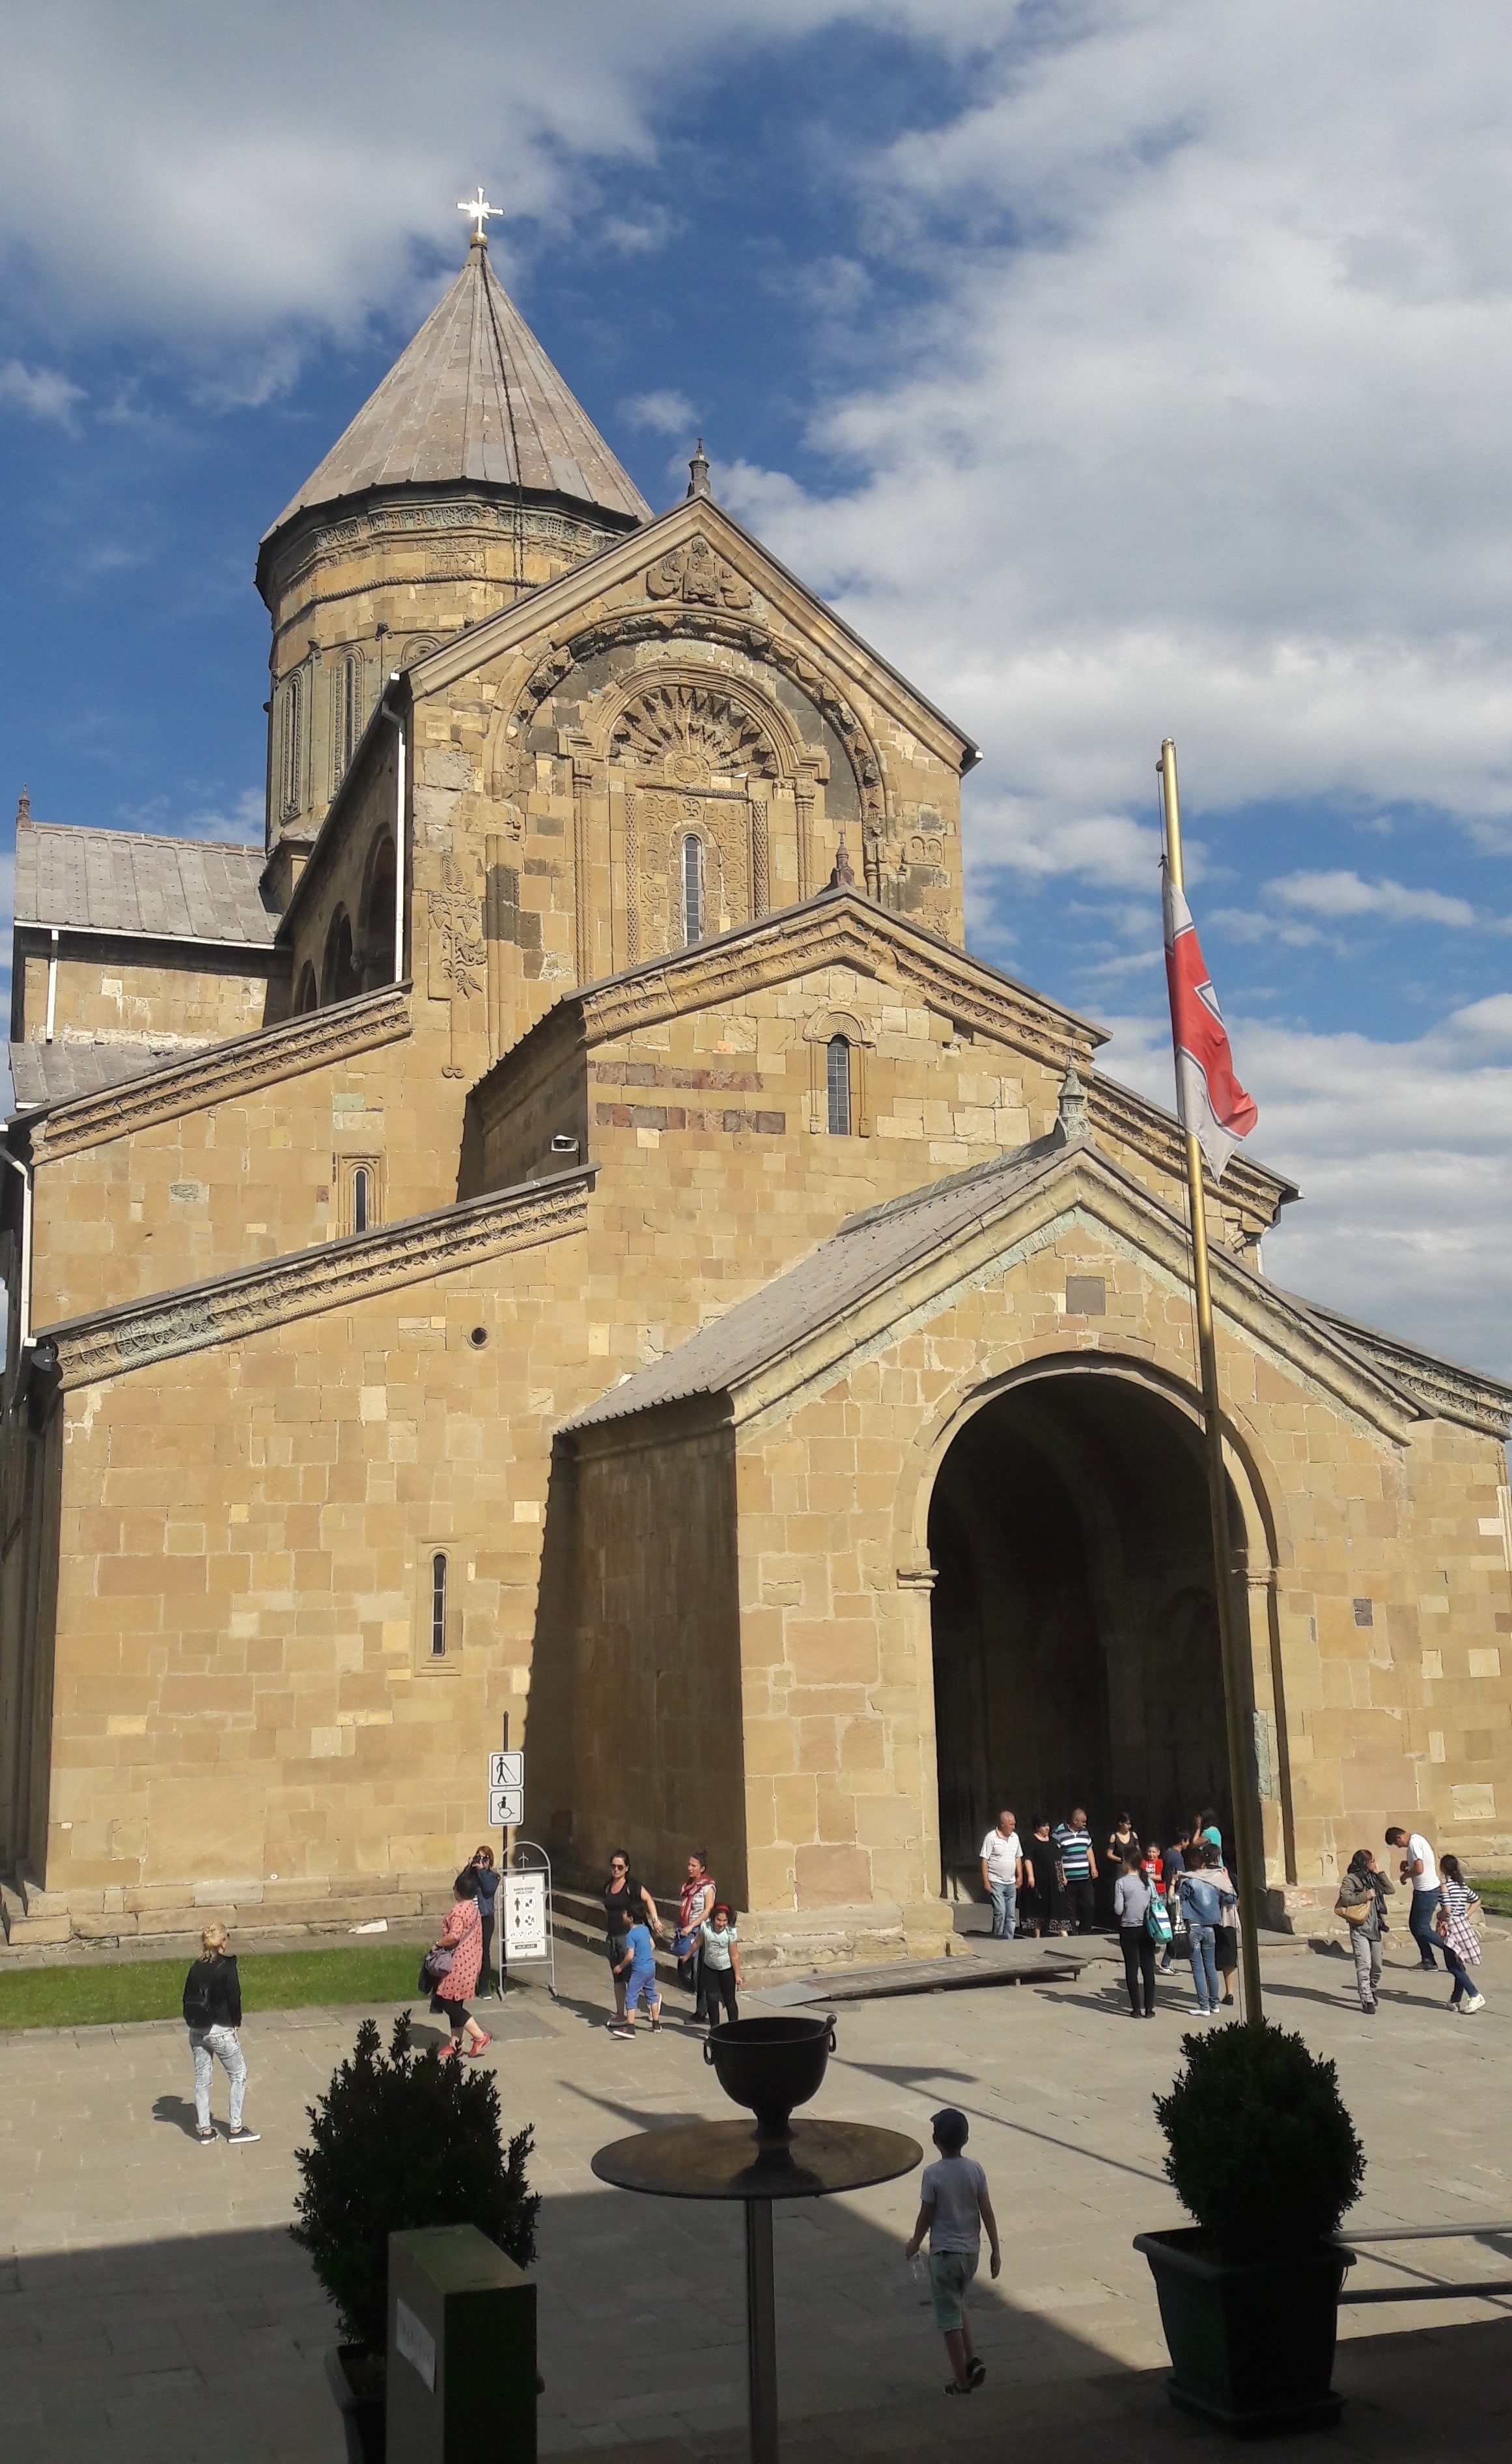 A view of the royal and magnificent Svetitskhoveli Cathedral